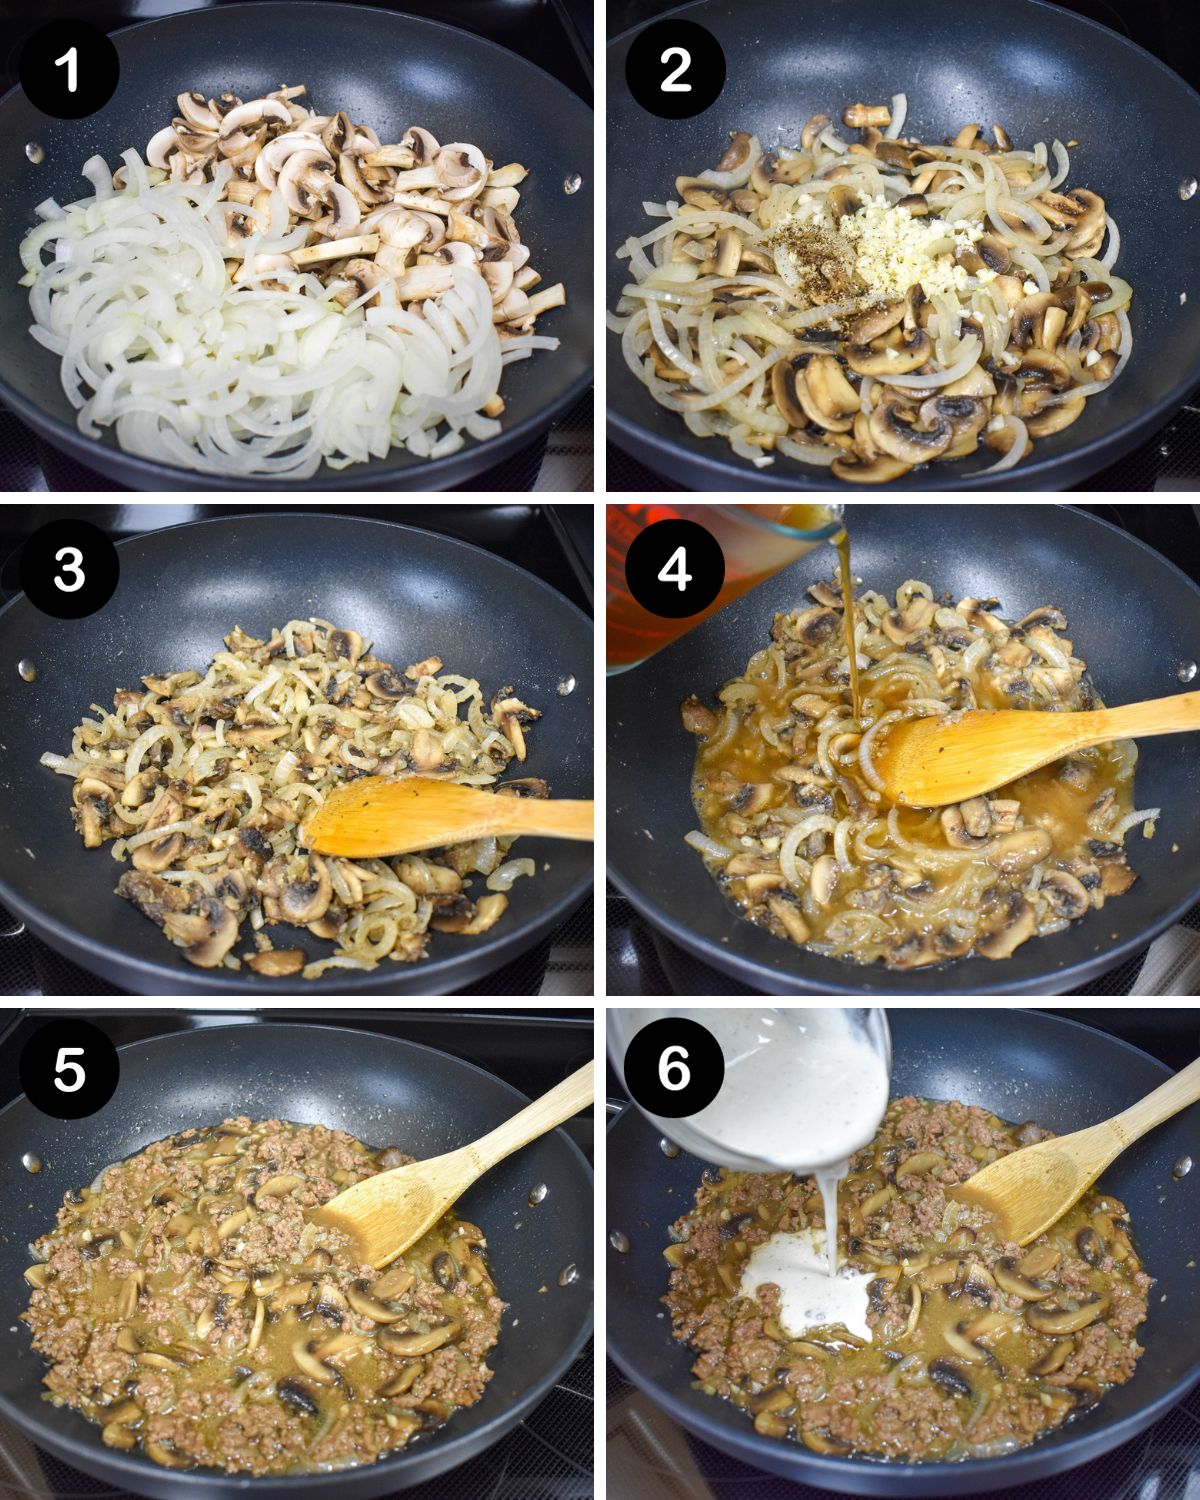 A collage of six images showing the steps of making the mushroom and onion sauce for the dish.